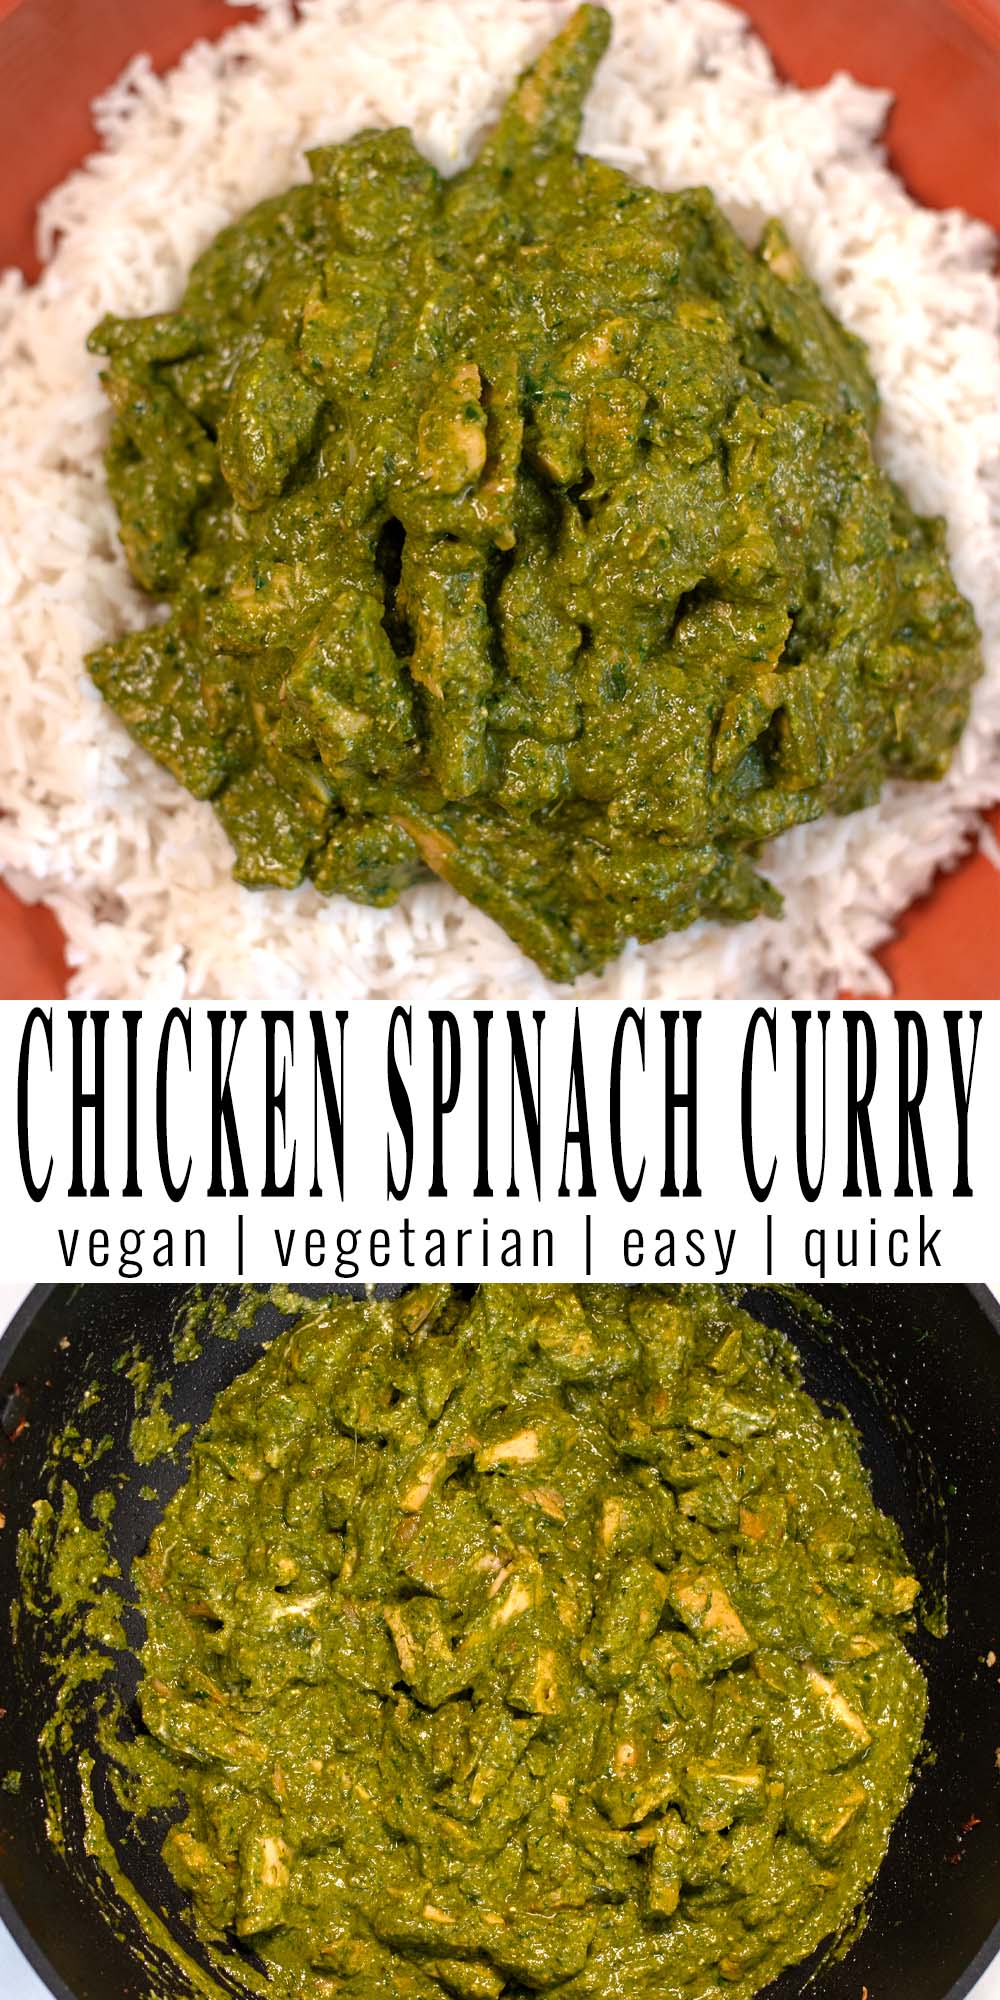 Collage of two pictures of Chicken Spinach Curry with recipe title text.